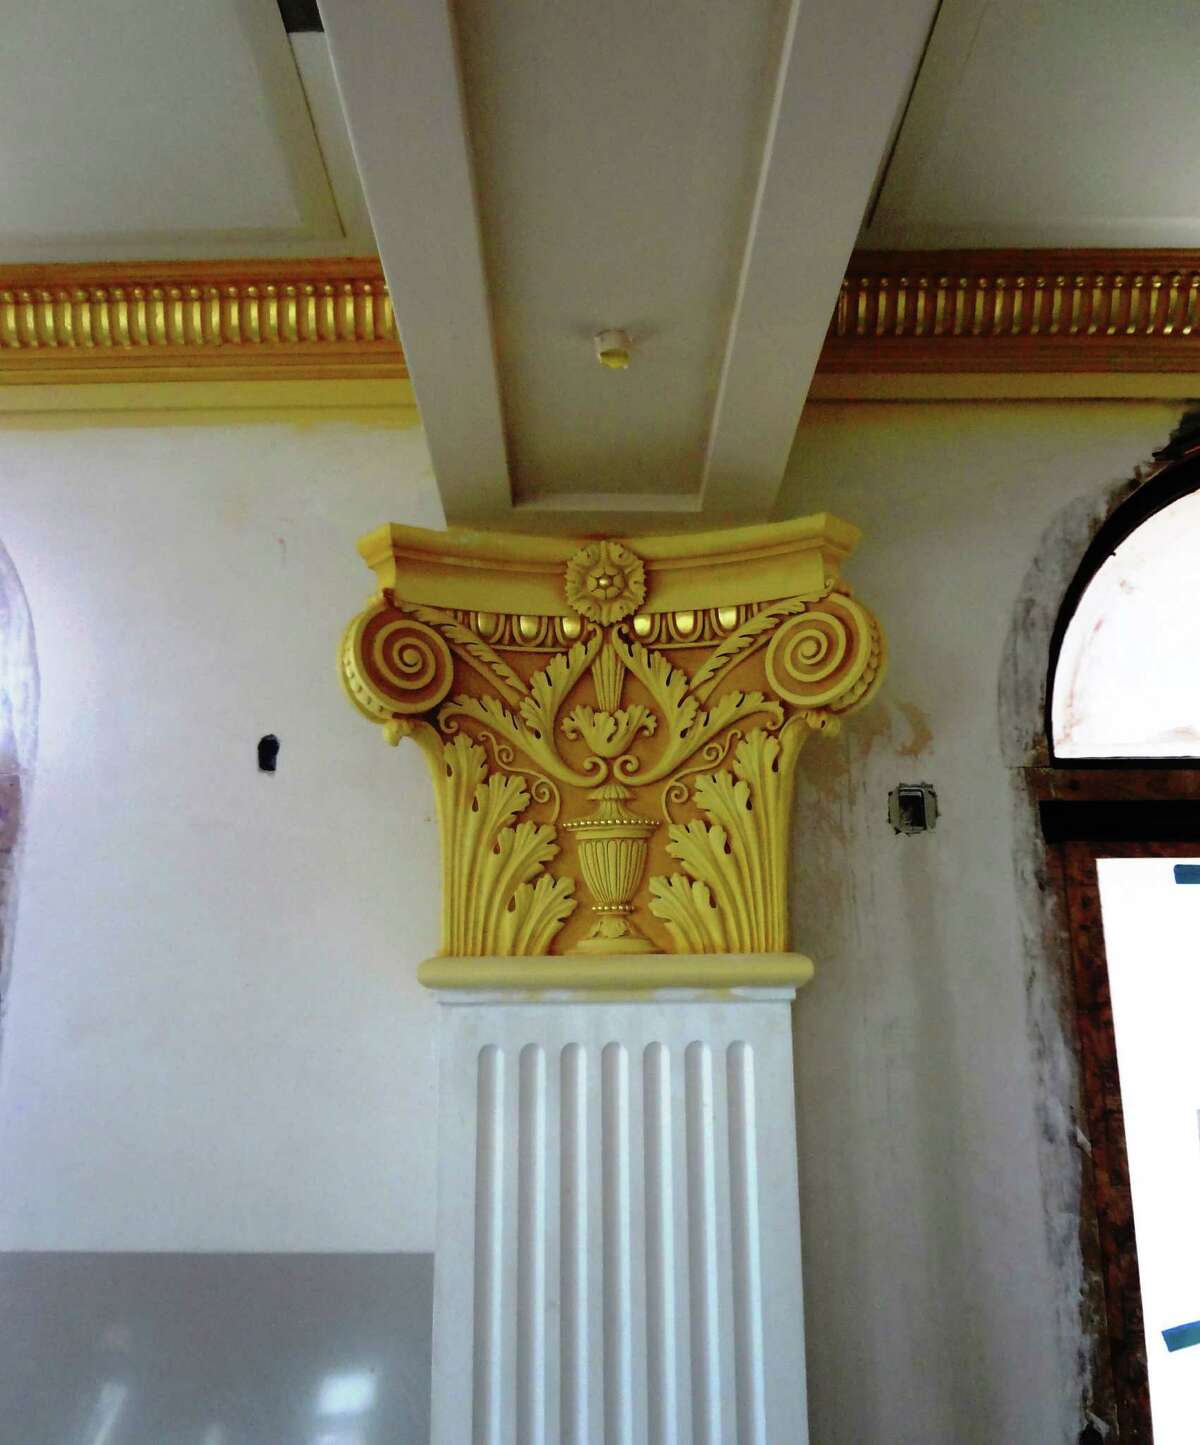 Restored column capitals in the double-height courtroom have a classical motif.